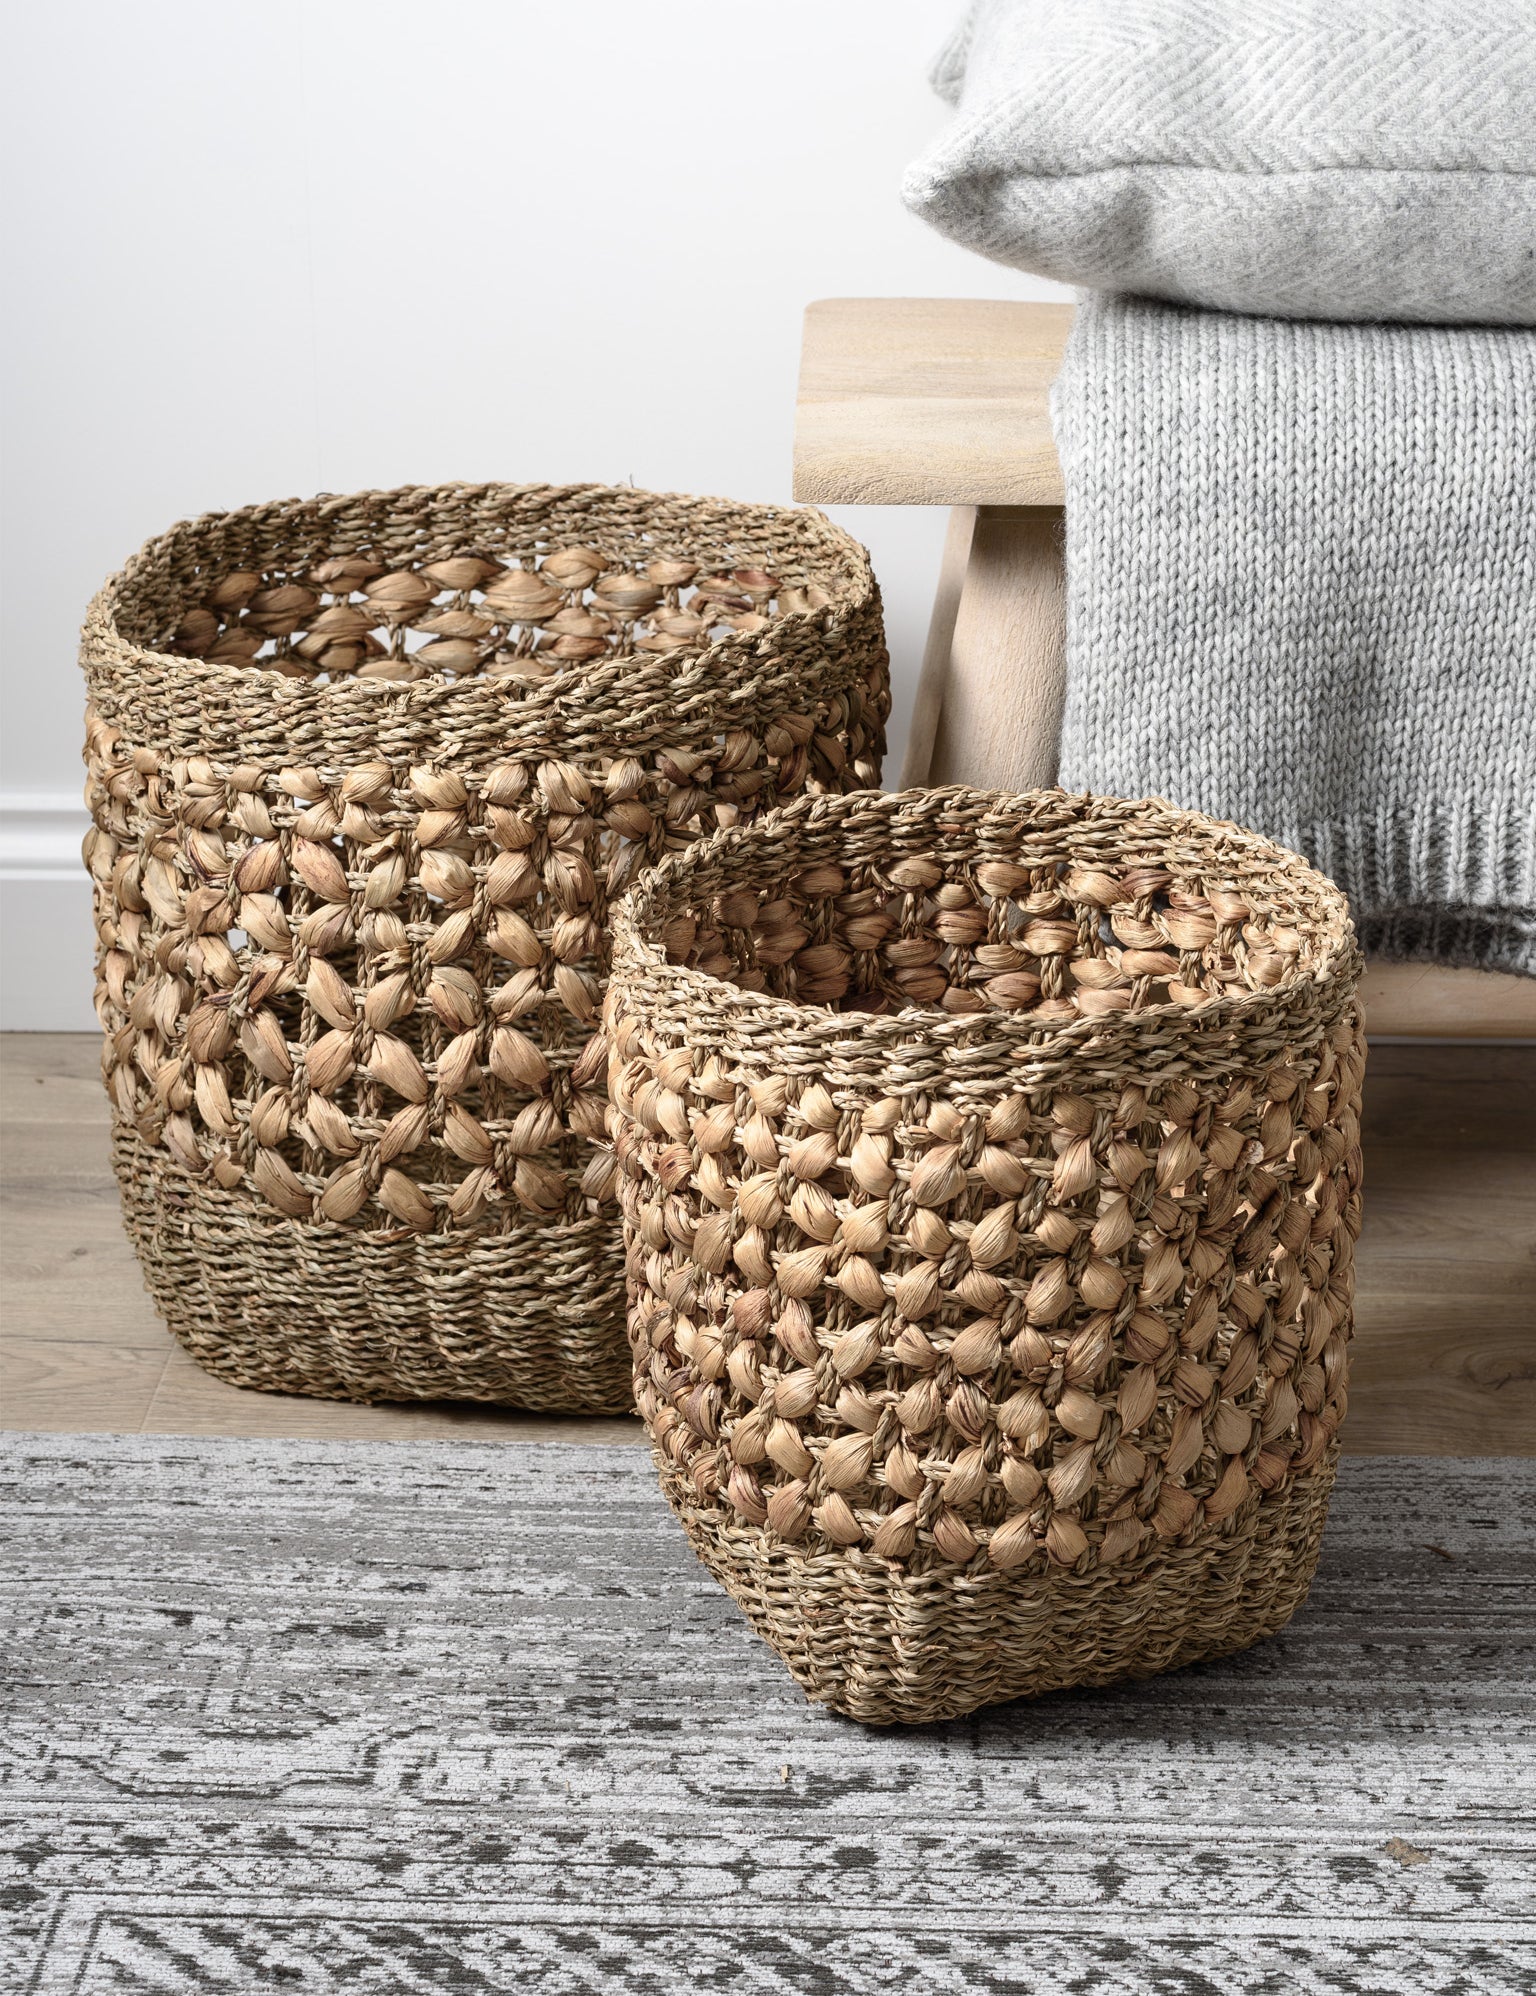 Woven Natural Seagrass and Water Hyacinth Baskets Set of 3